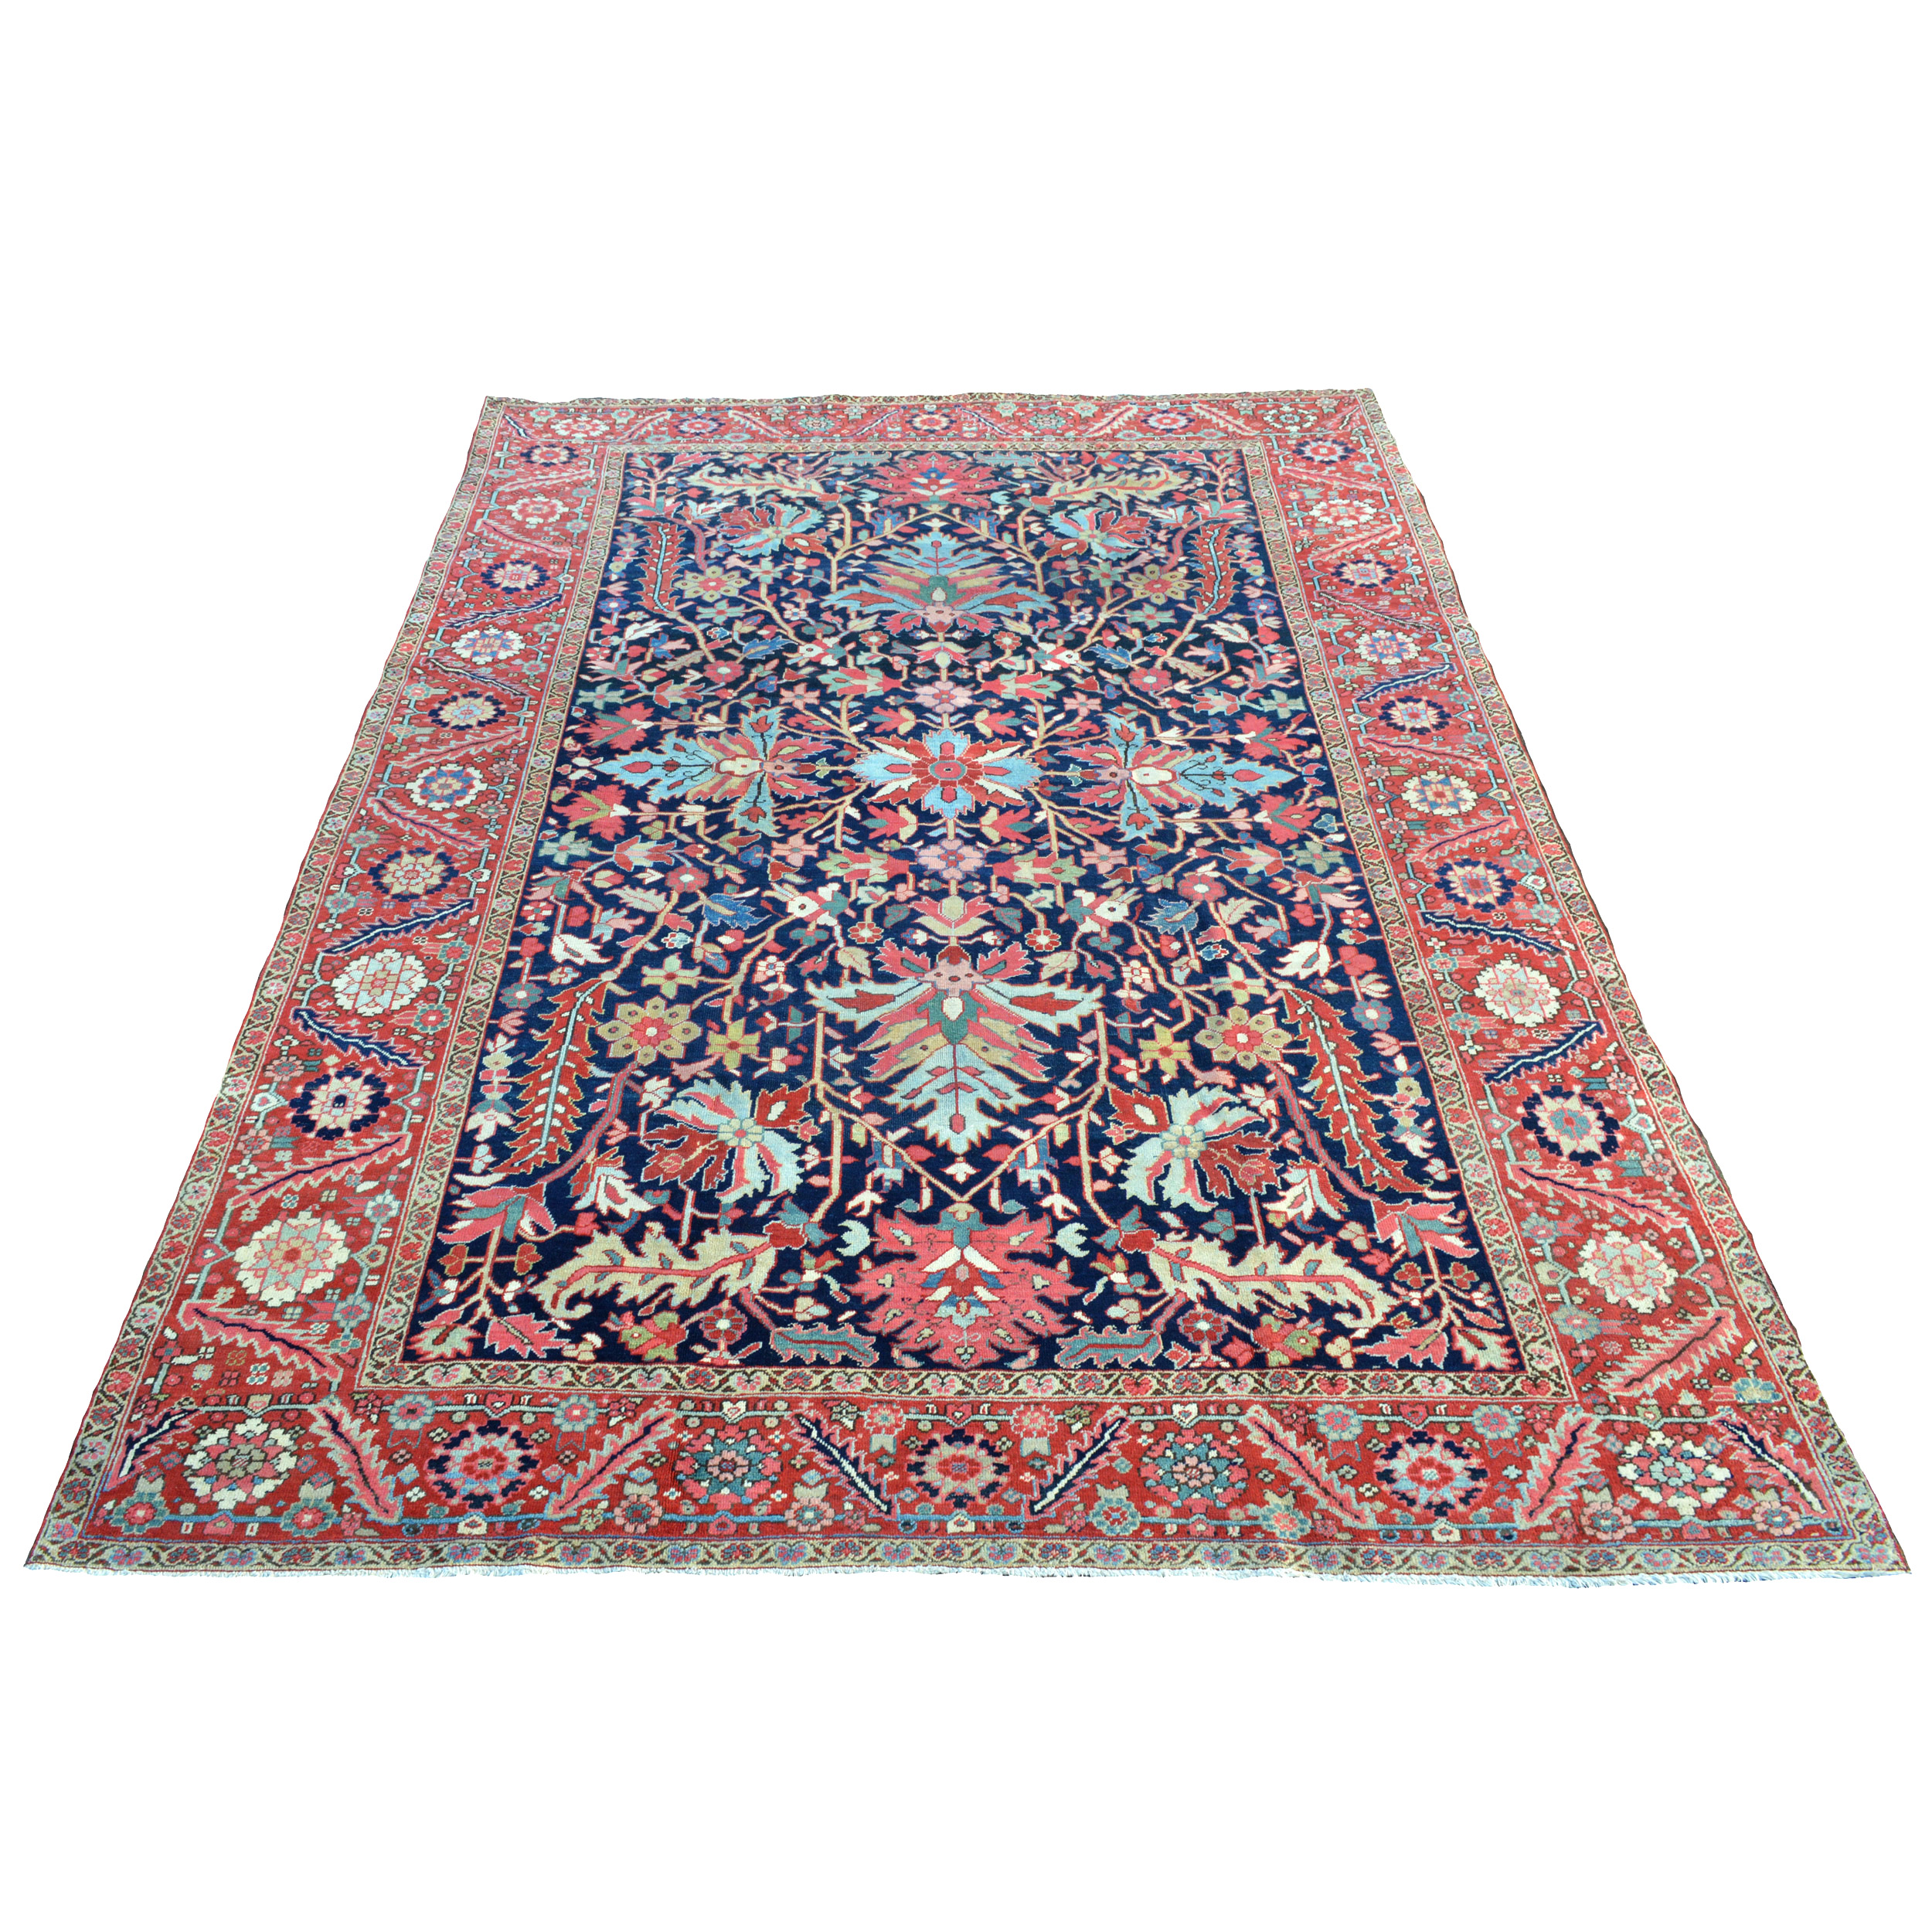 An antique Persian Heriz carpet, circa 1910, with large, polychromatic palmettes, leaves and ancillary stylized floral motifs on a navy blue field. A brick red border with flowerheads and leaves frames the field. Douglas Stock Gallery is one of America's most respected dealers in antique Persian carpets. Antique rugs Boston,MA area